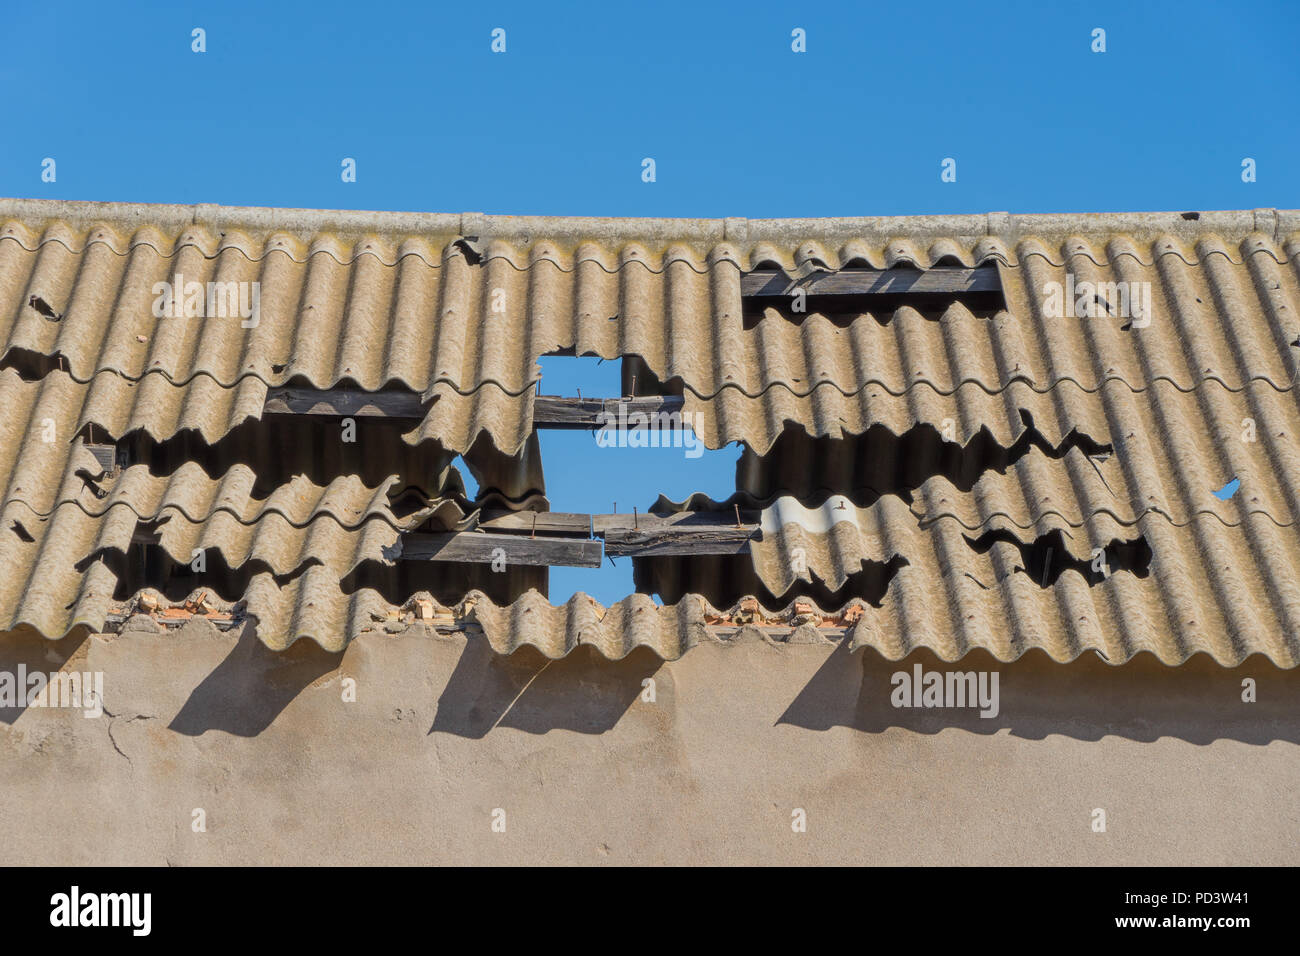 Corrugated asbestos roof in poor state of repair against a clear blue sky. Stock Photo